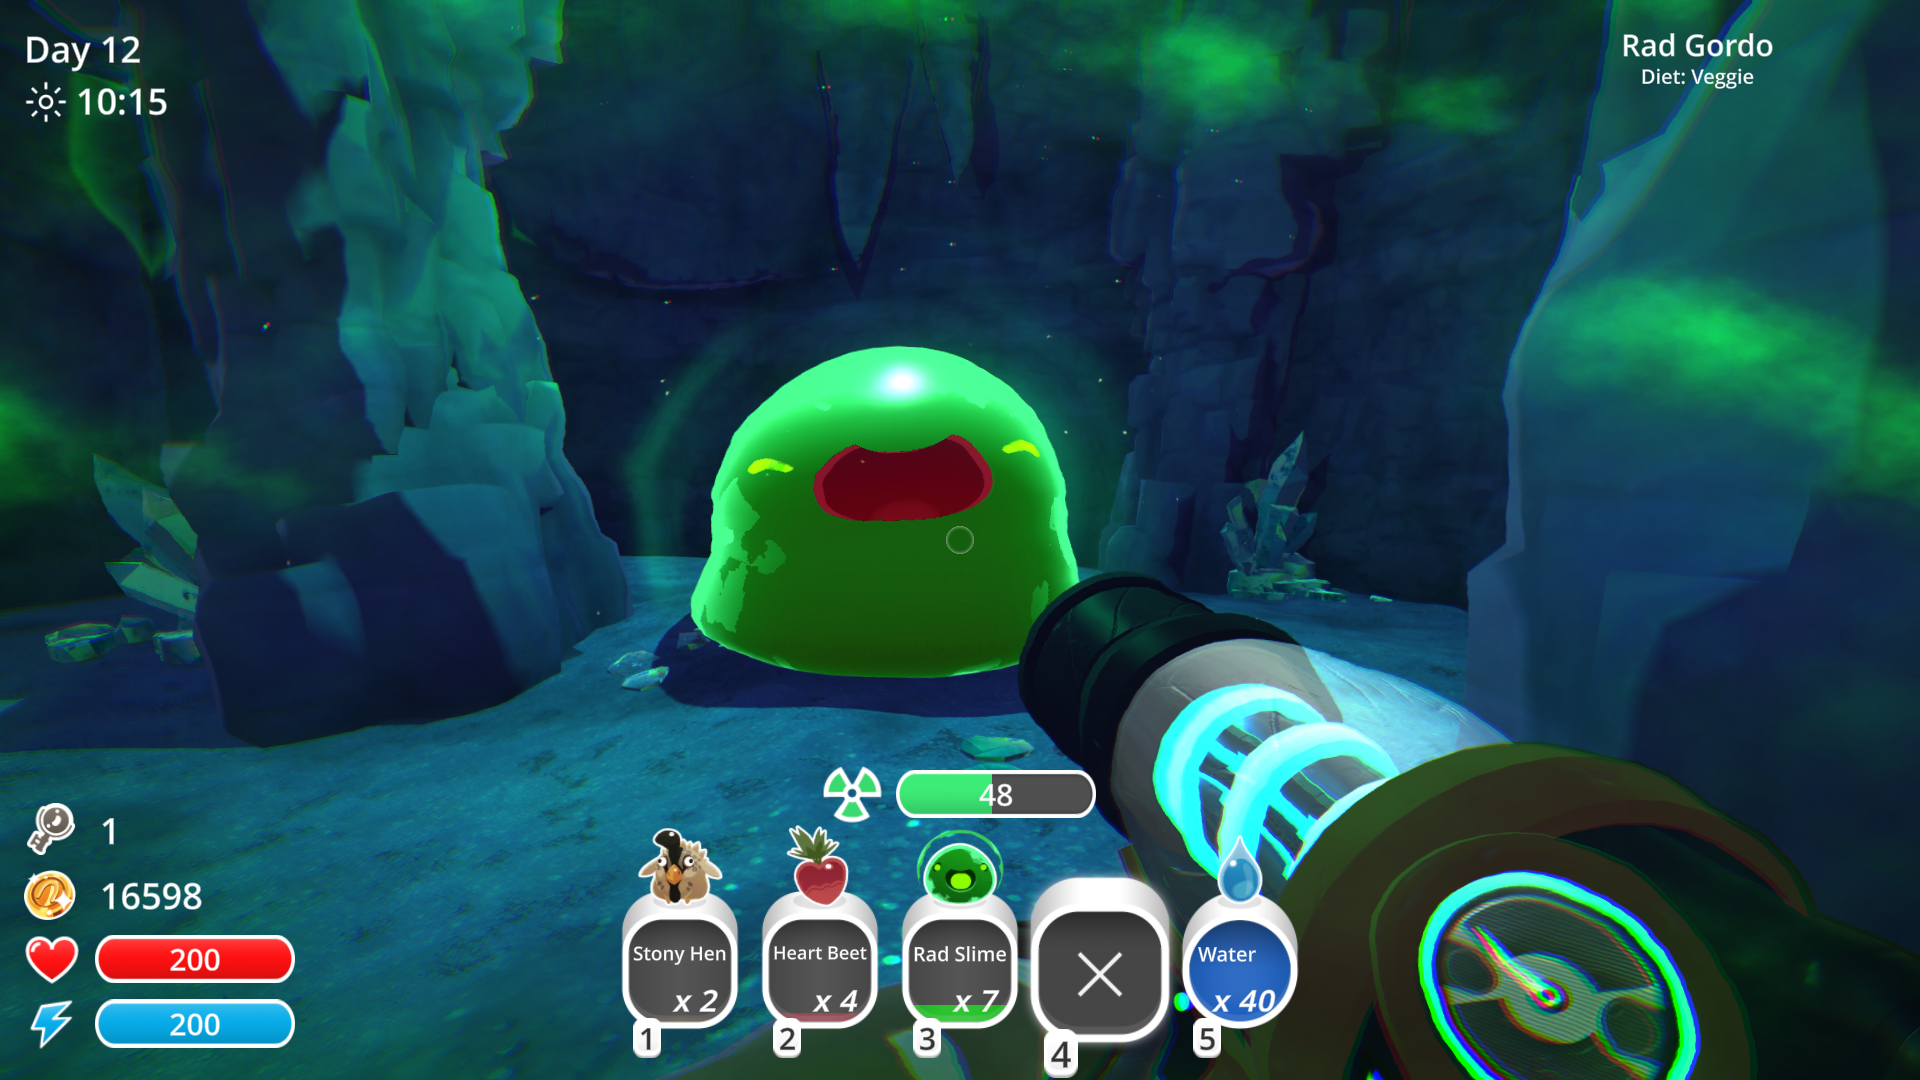 How to Find a Slime Key Gordo - Moss Blanket Locations: Slime Rancher 